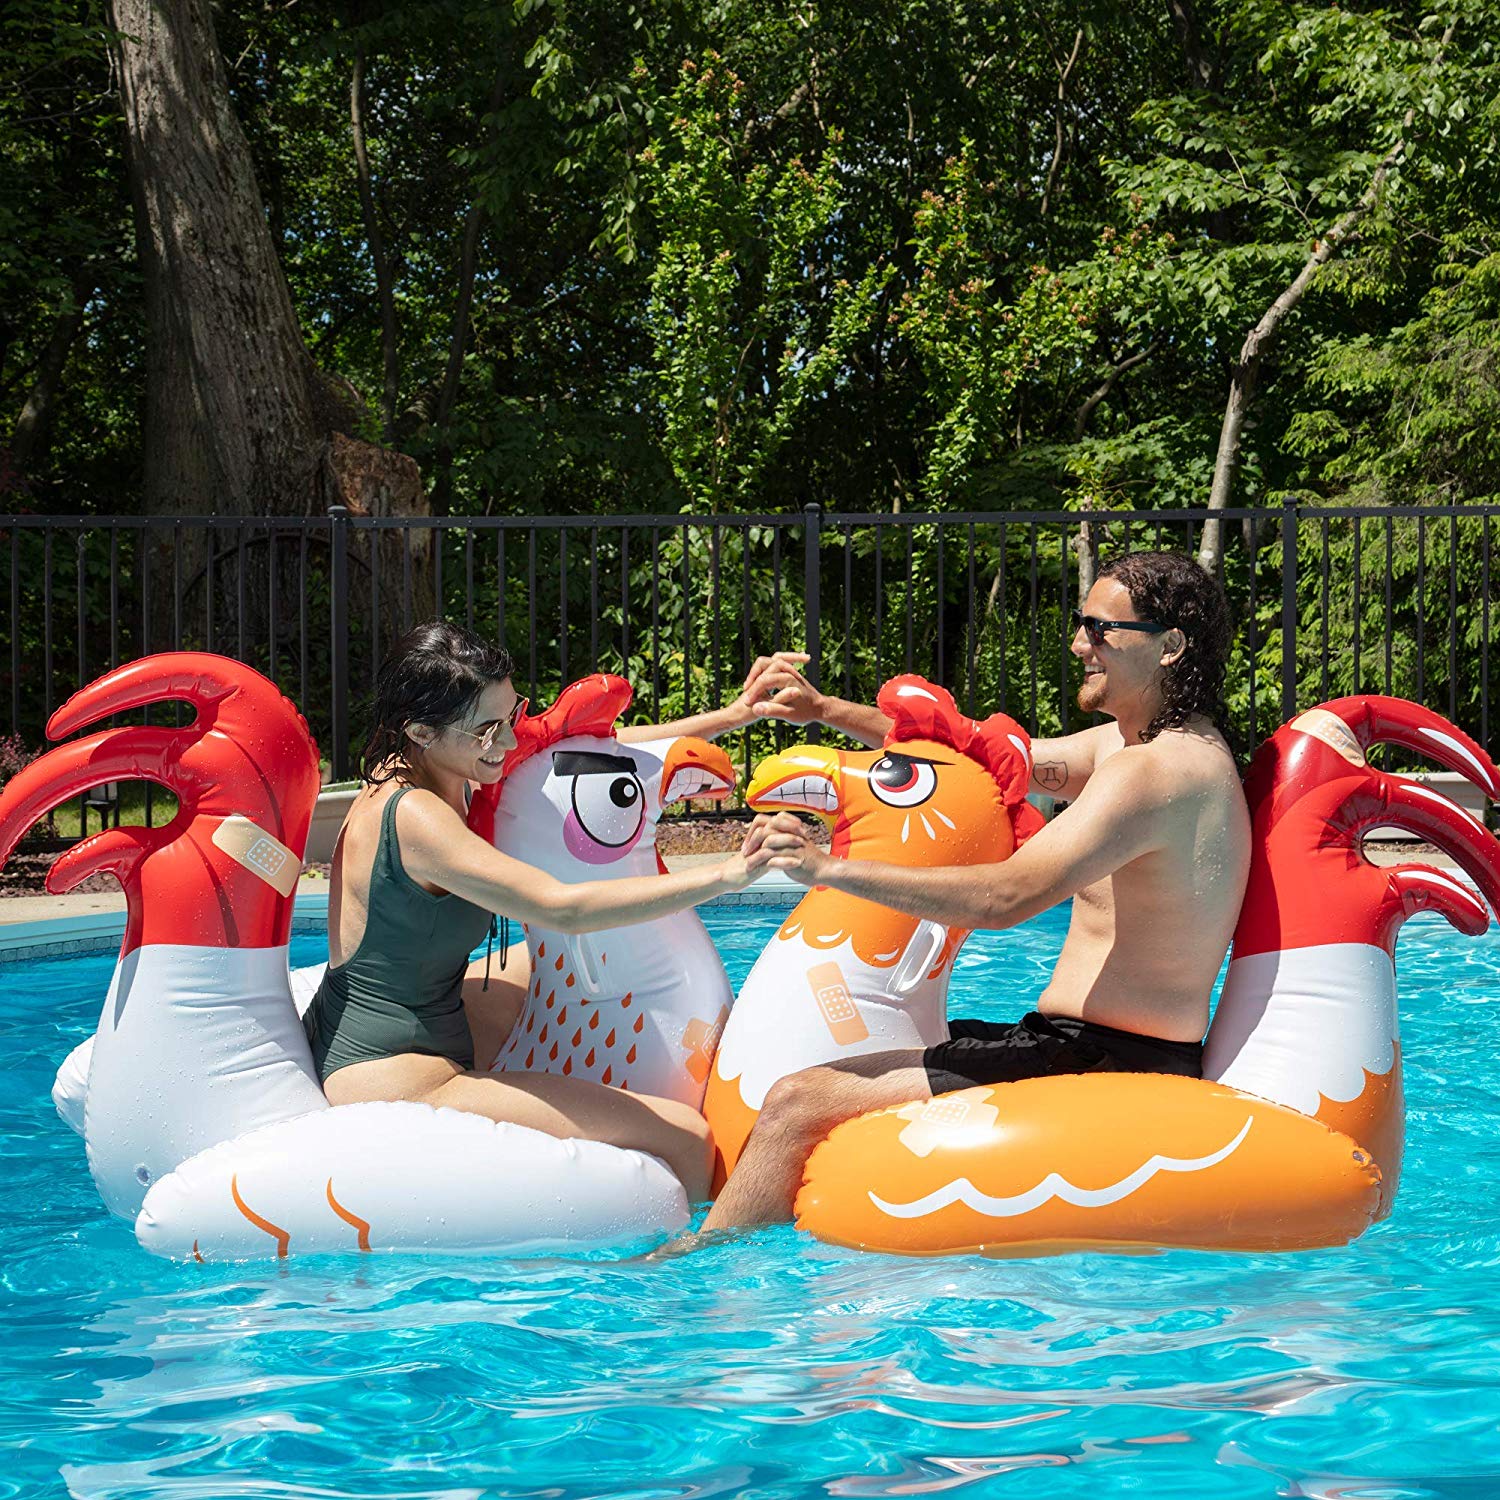 These Inflatable Chicken Pool Floats Make You Fight To The Death… Or Until Someone Falls Off